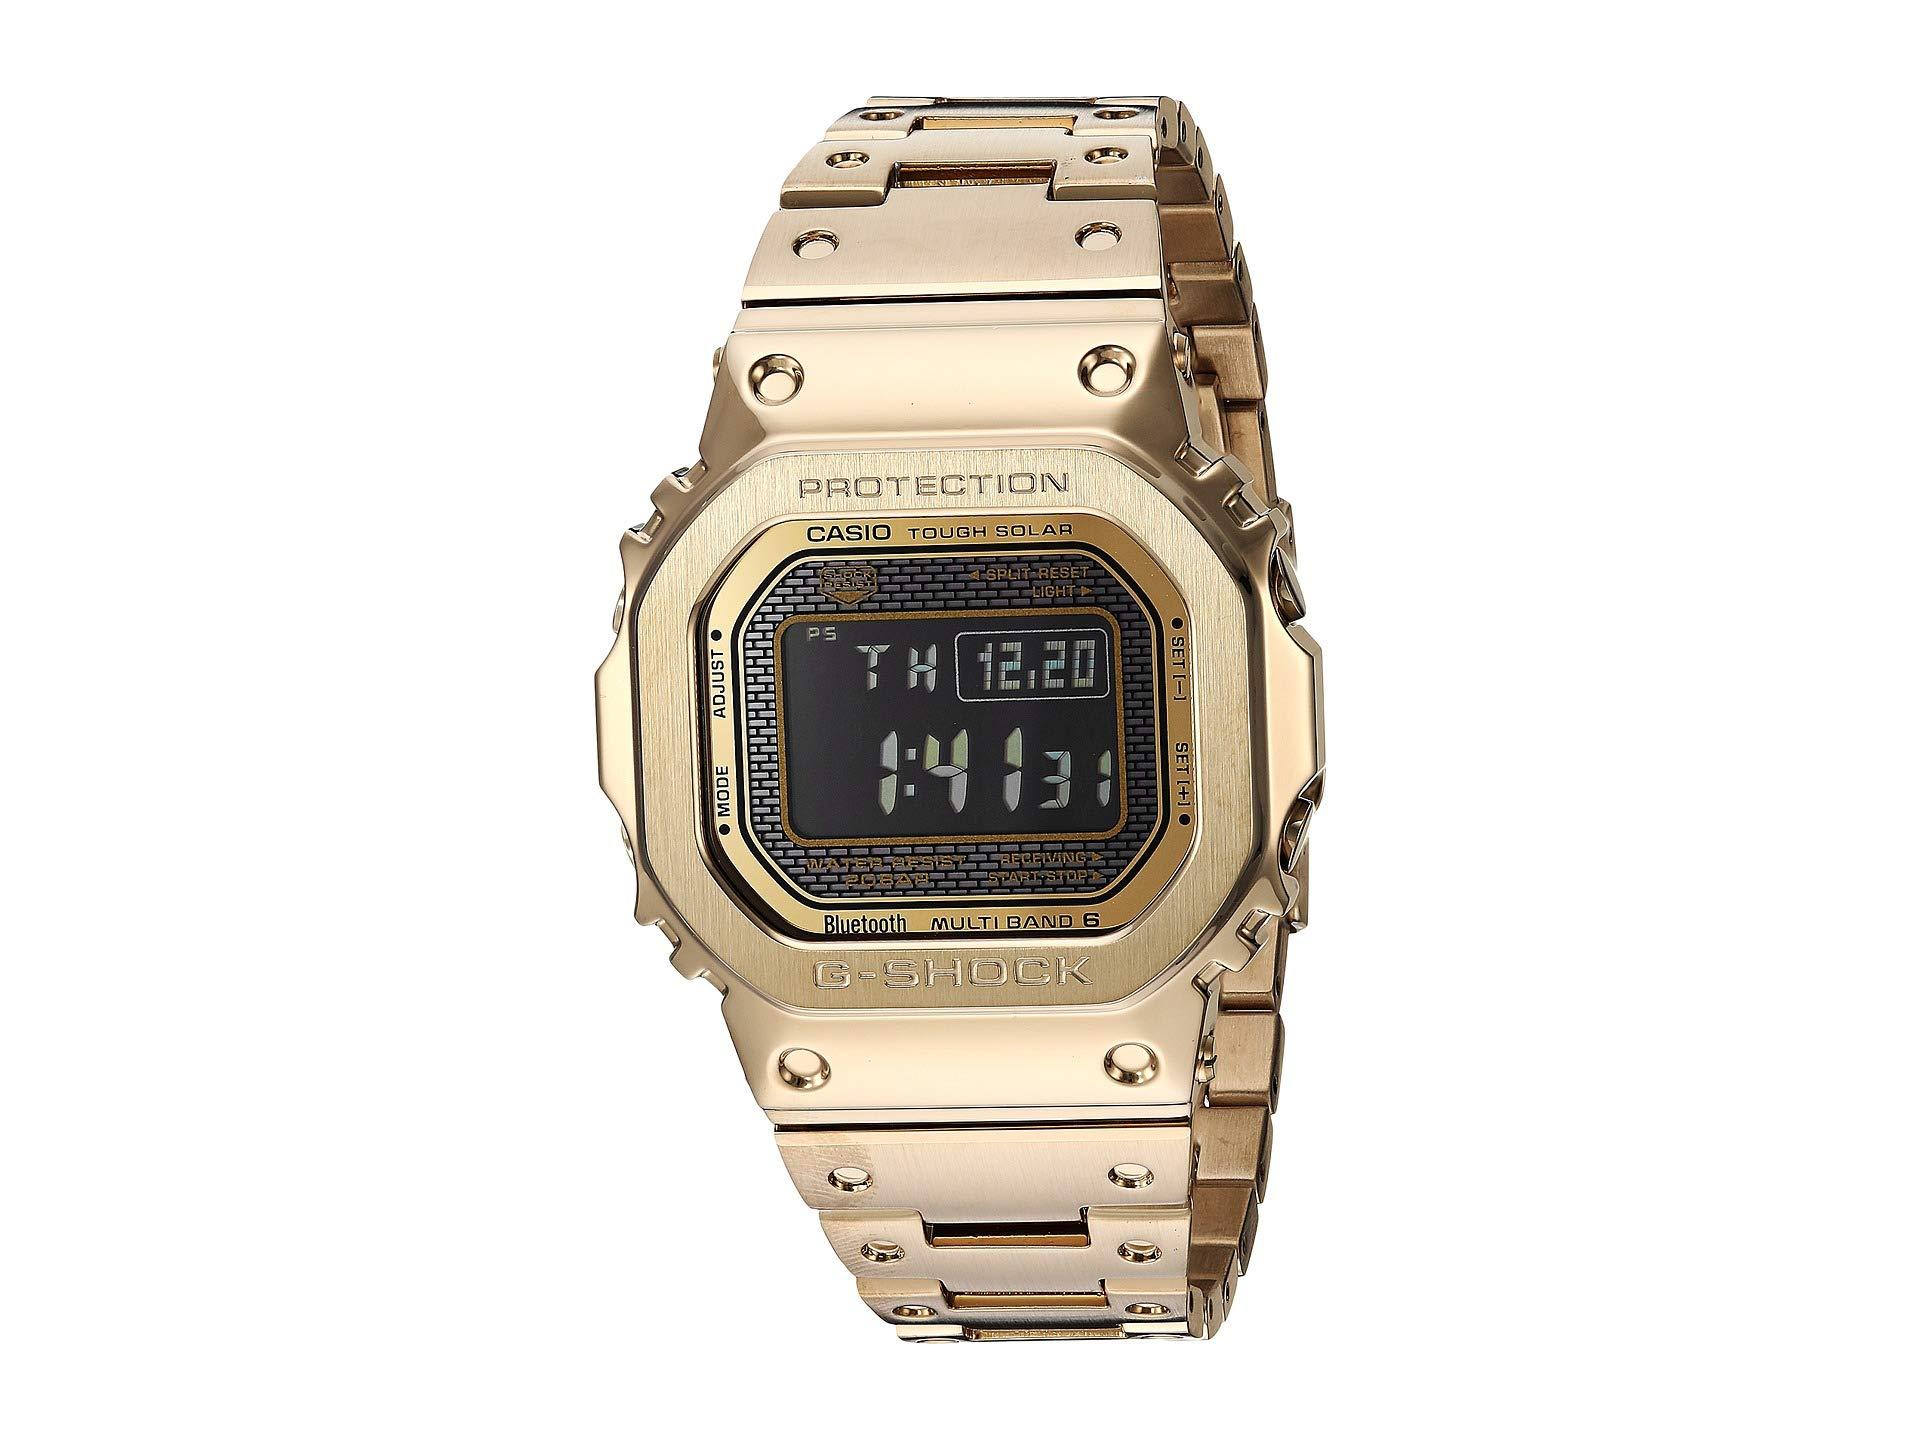 G-Shock Gmw-b5000gd-9cr (gold) Watches in Metallic for Men - Lyst